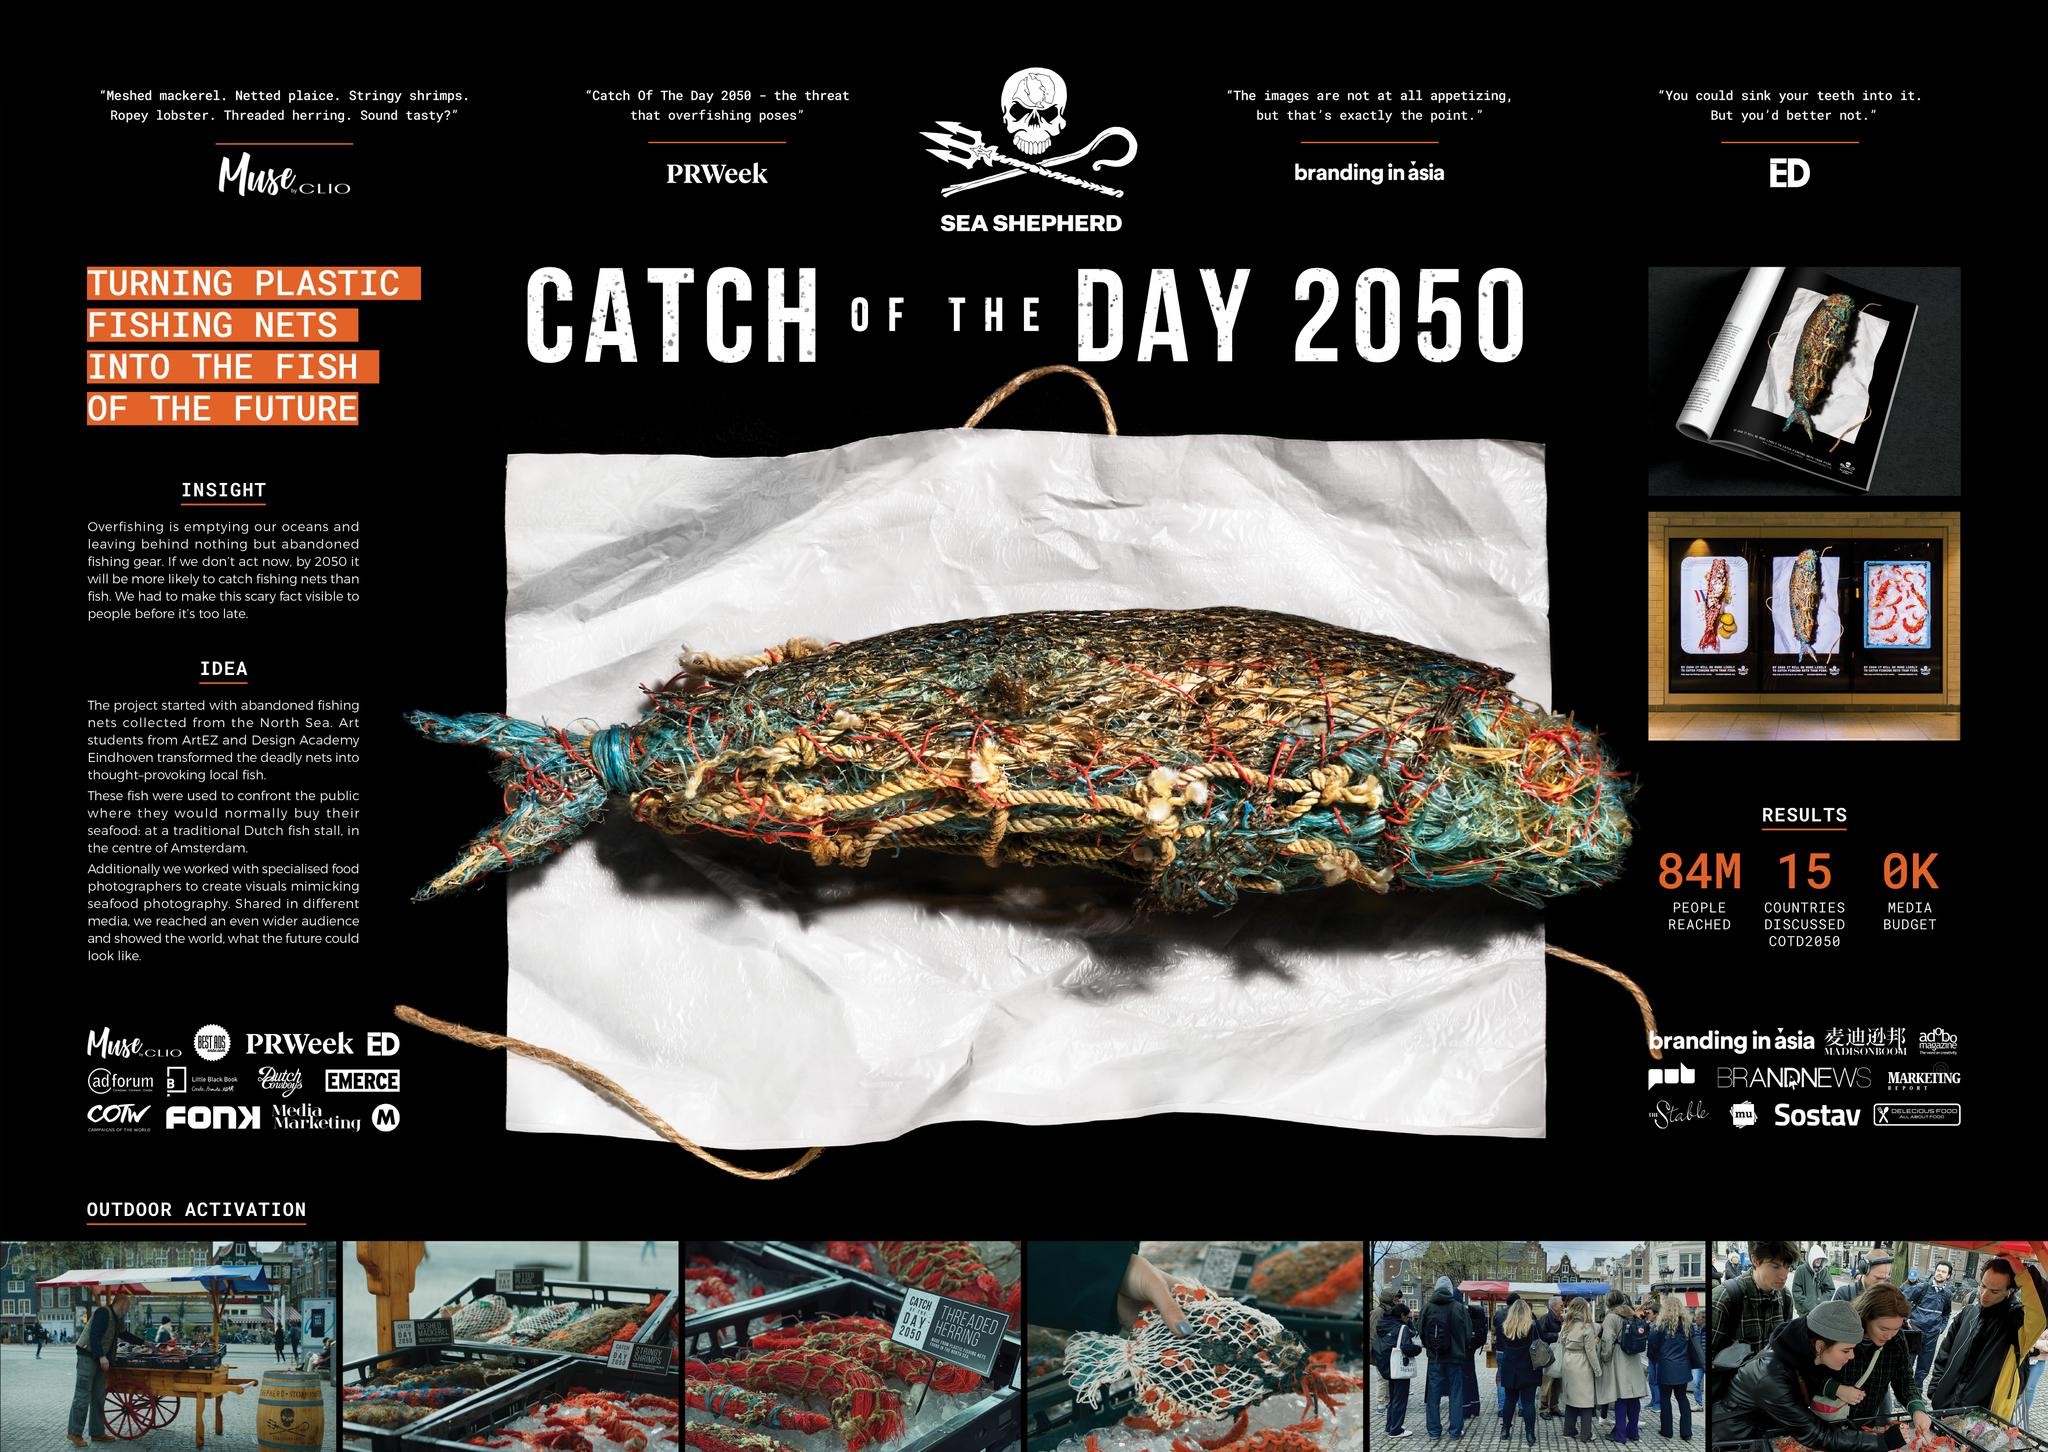 CATCH OF THE DAY 2050